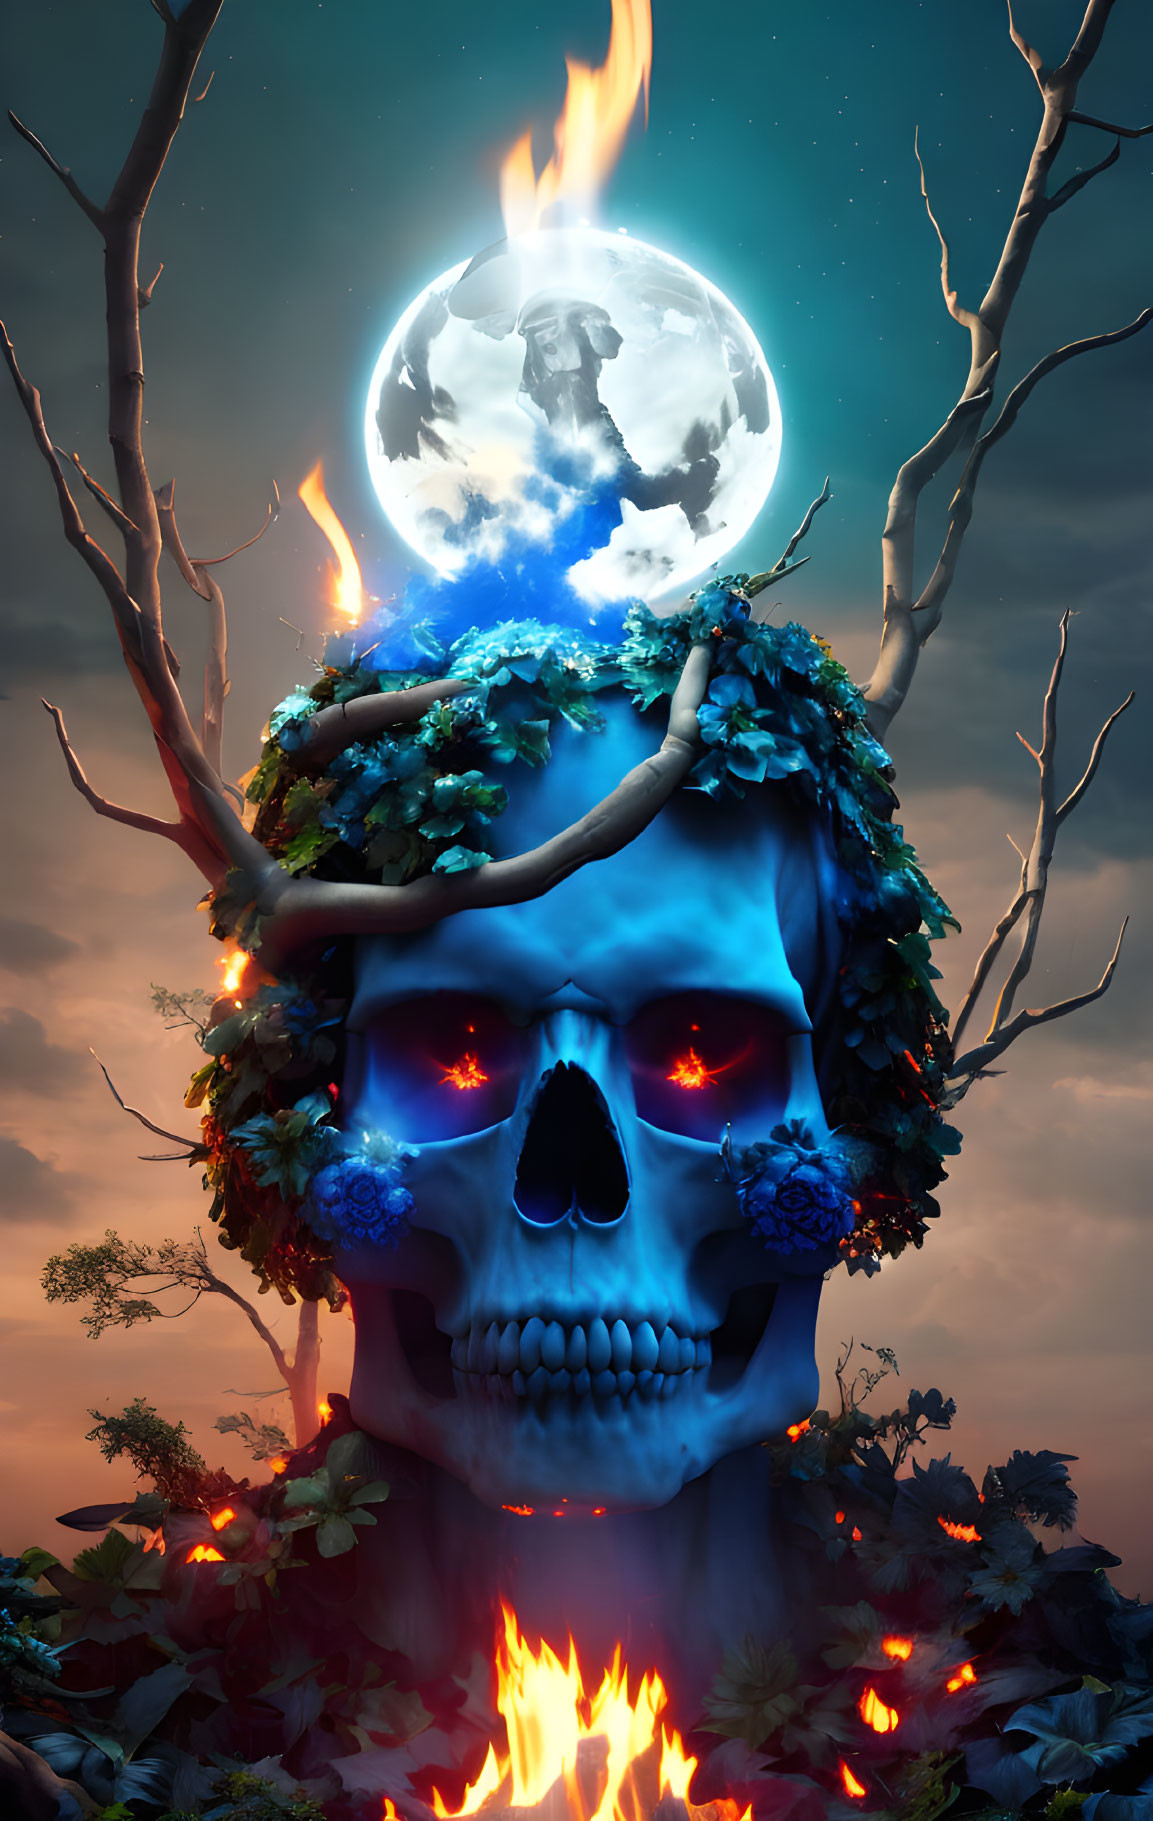 Giant Blue Skull with Tree Branches in Moonlit Night Sky